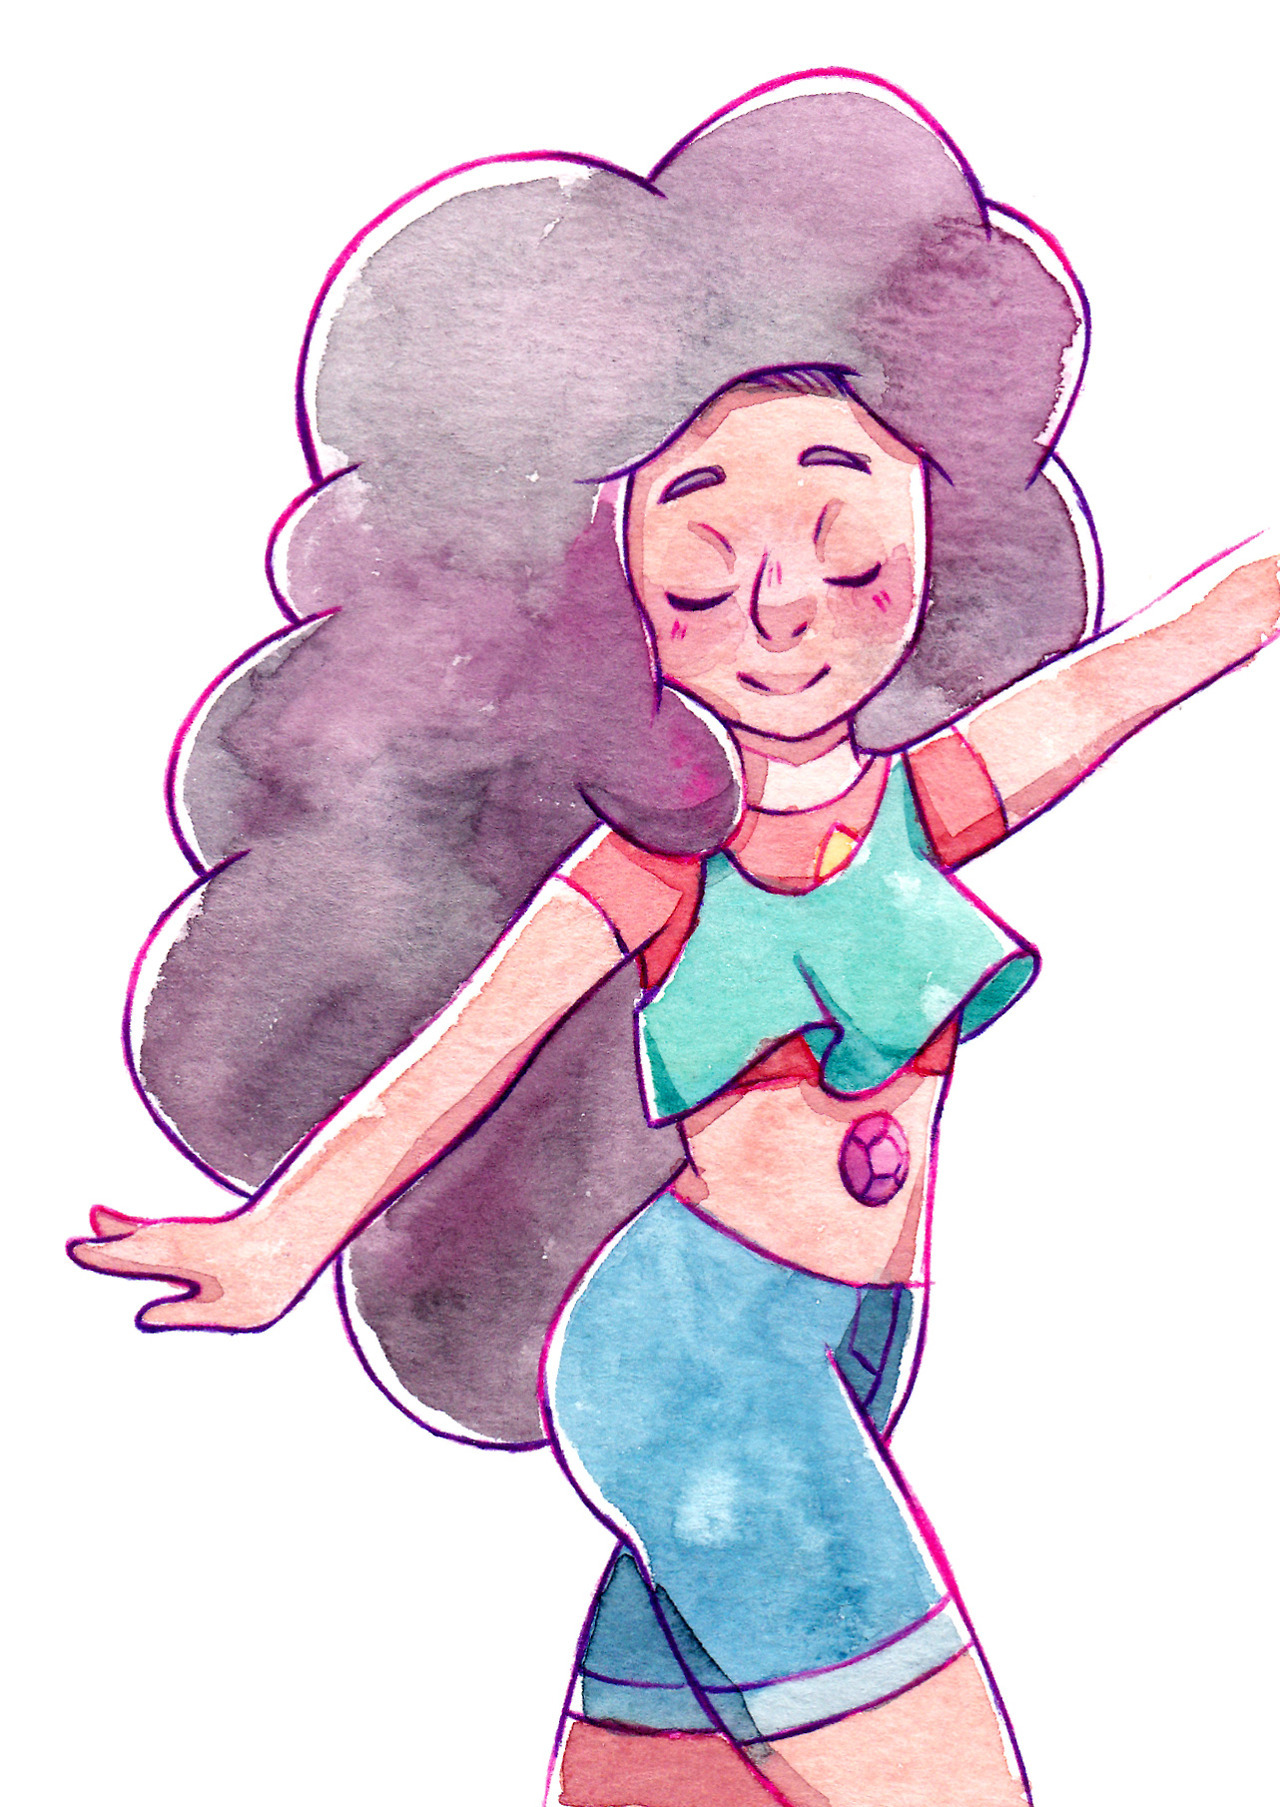 Made some Stevonnie fan art last month to test out my new watercolors. Also tried to ink with a ballpoint pen instead of black fineliners. I love how the colors turned out! :D